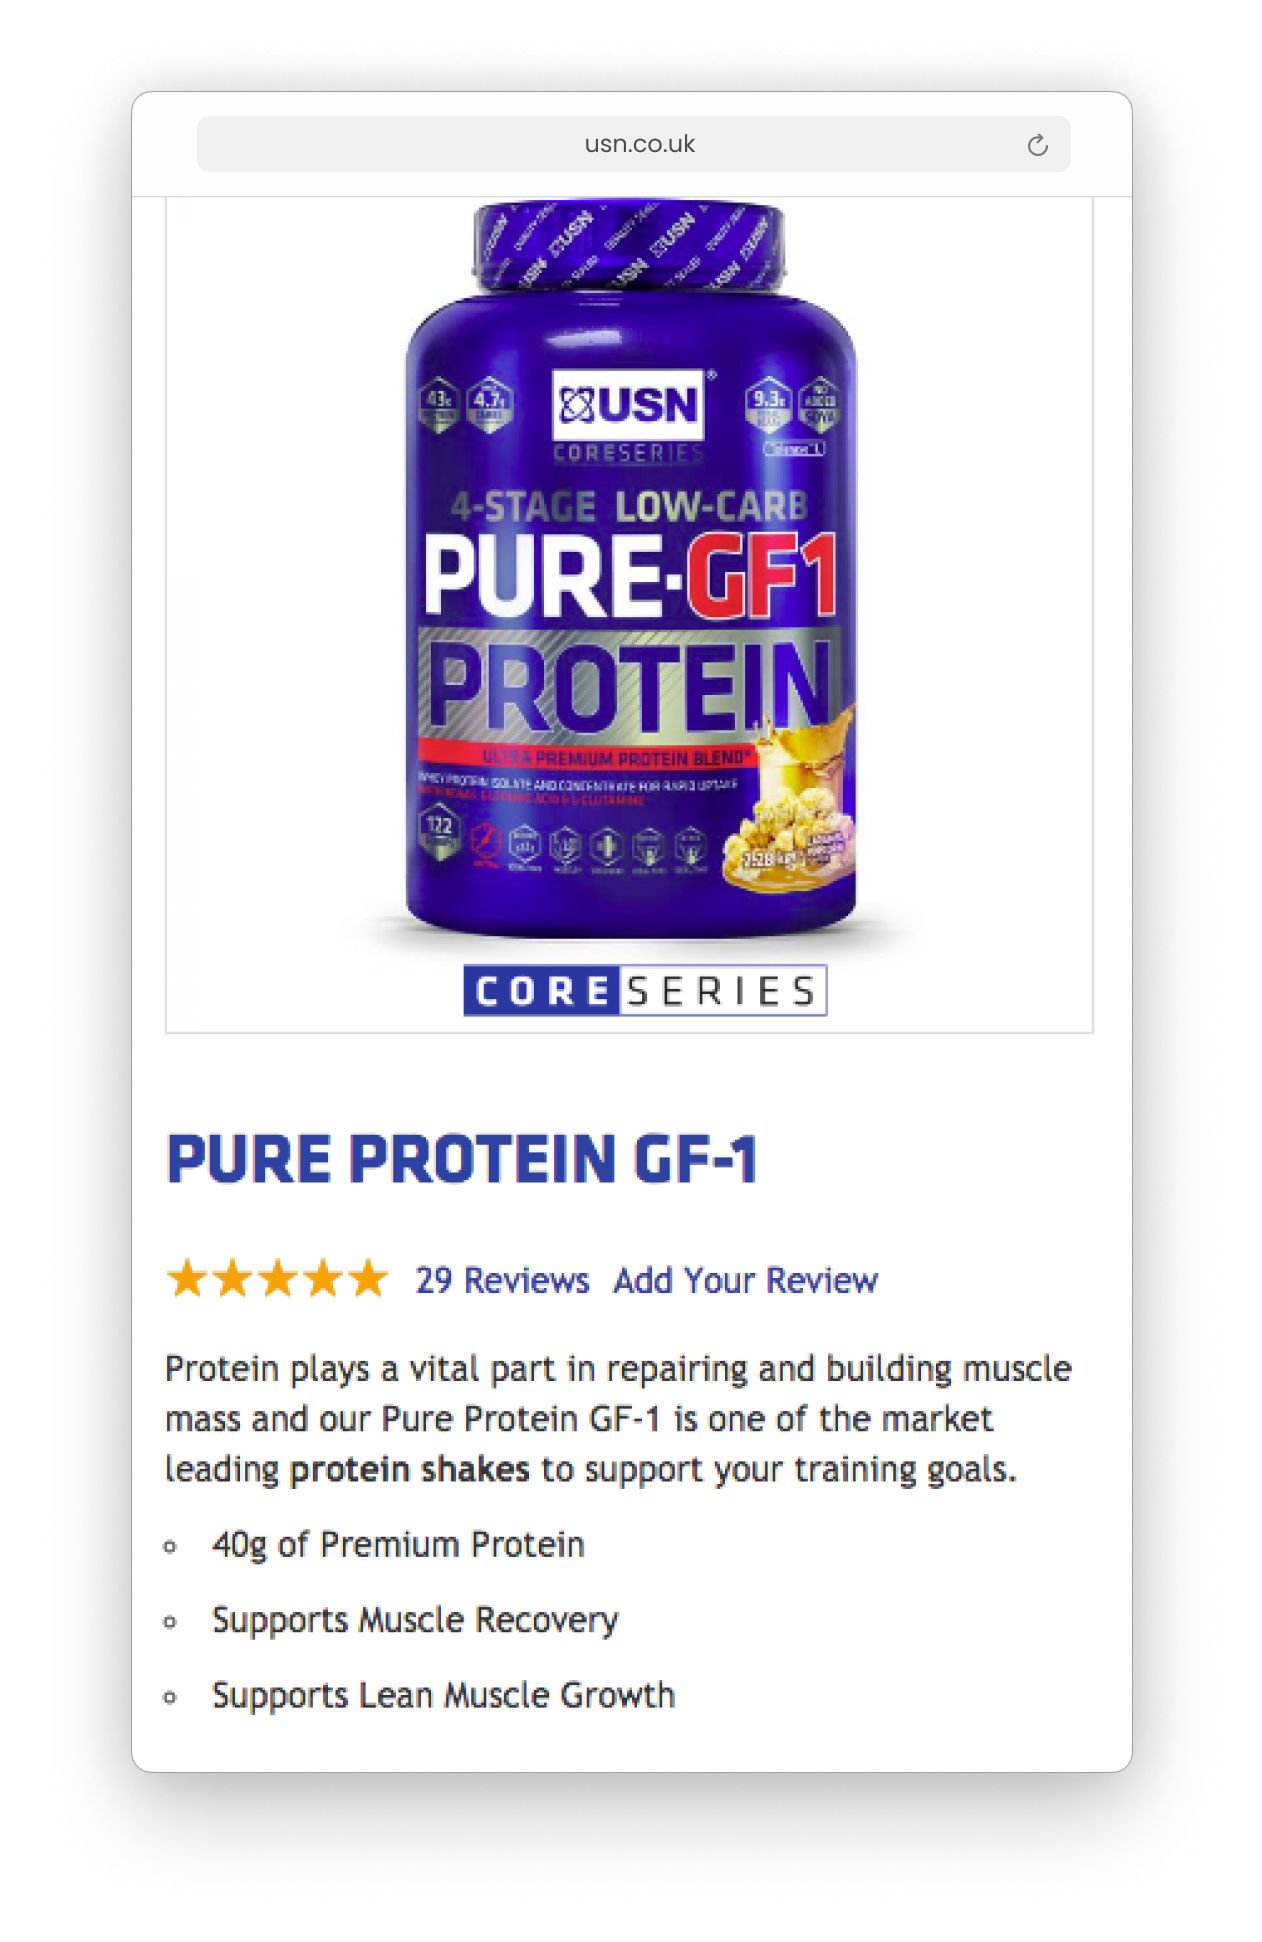 Product page on the USN website